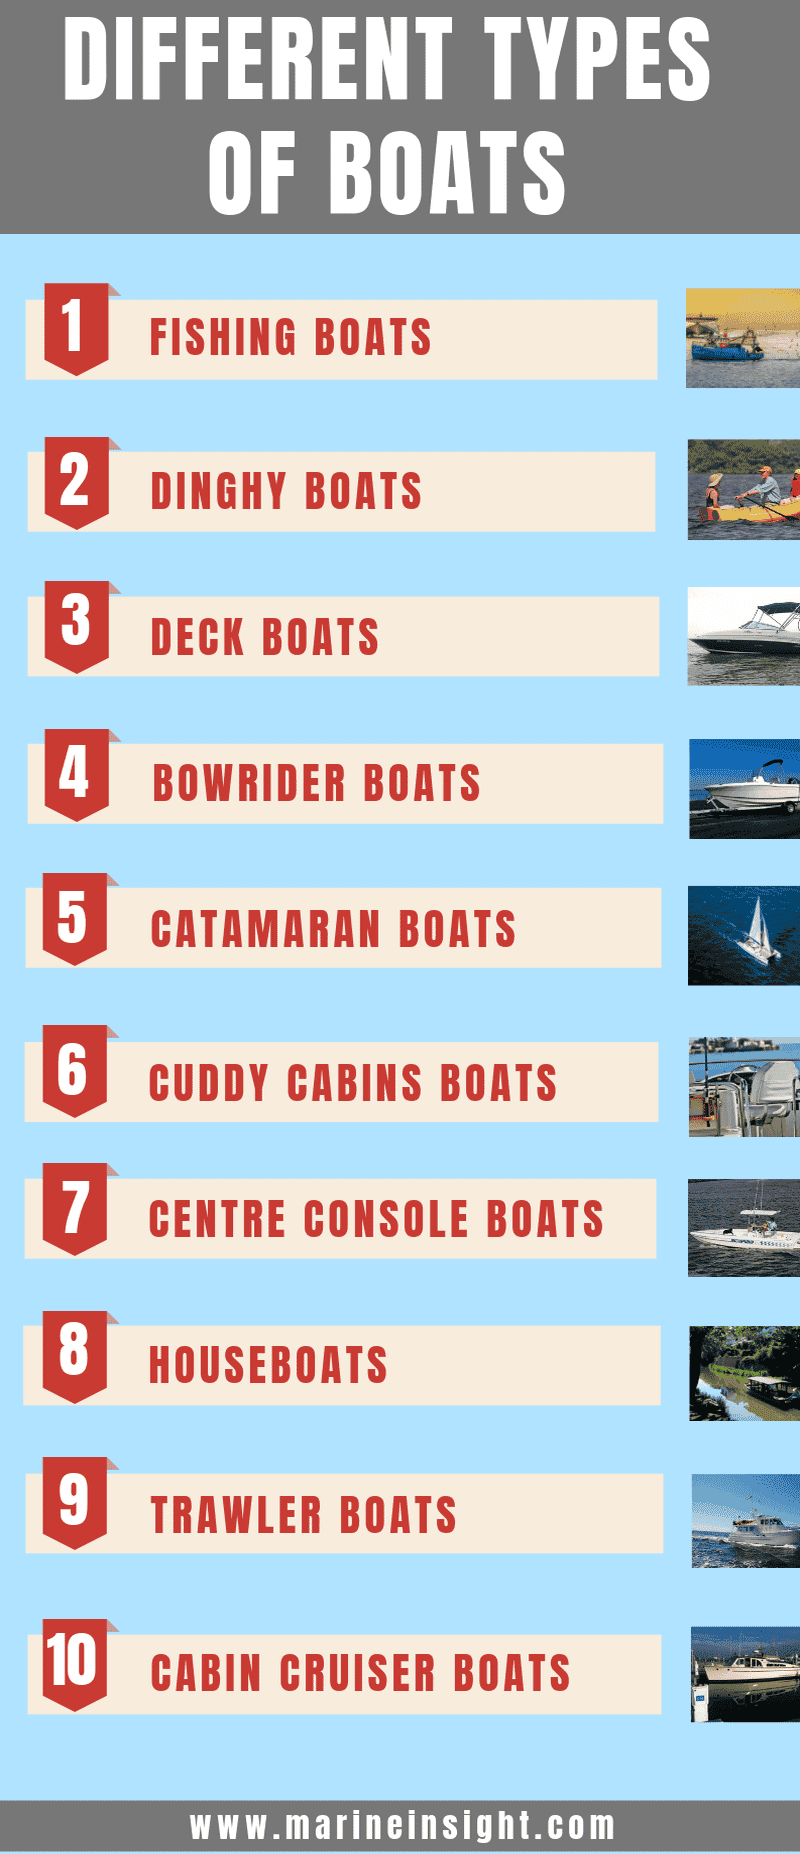 Types of Boats